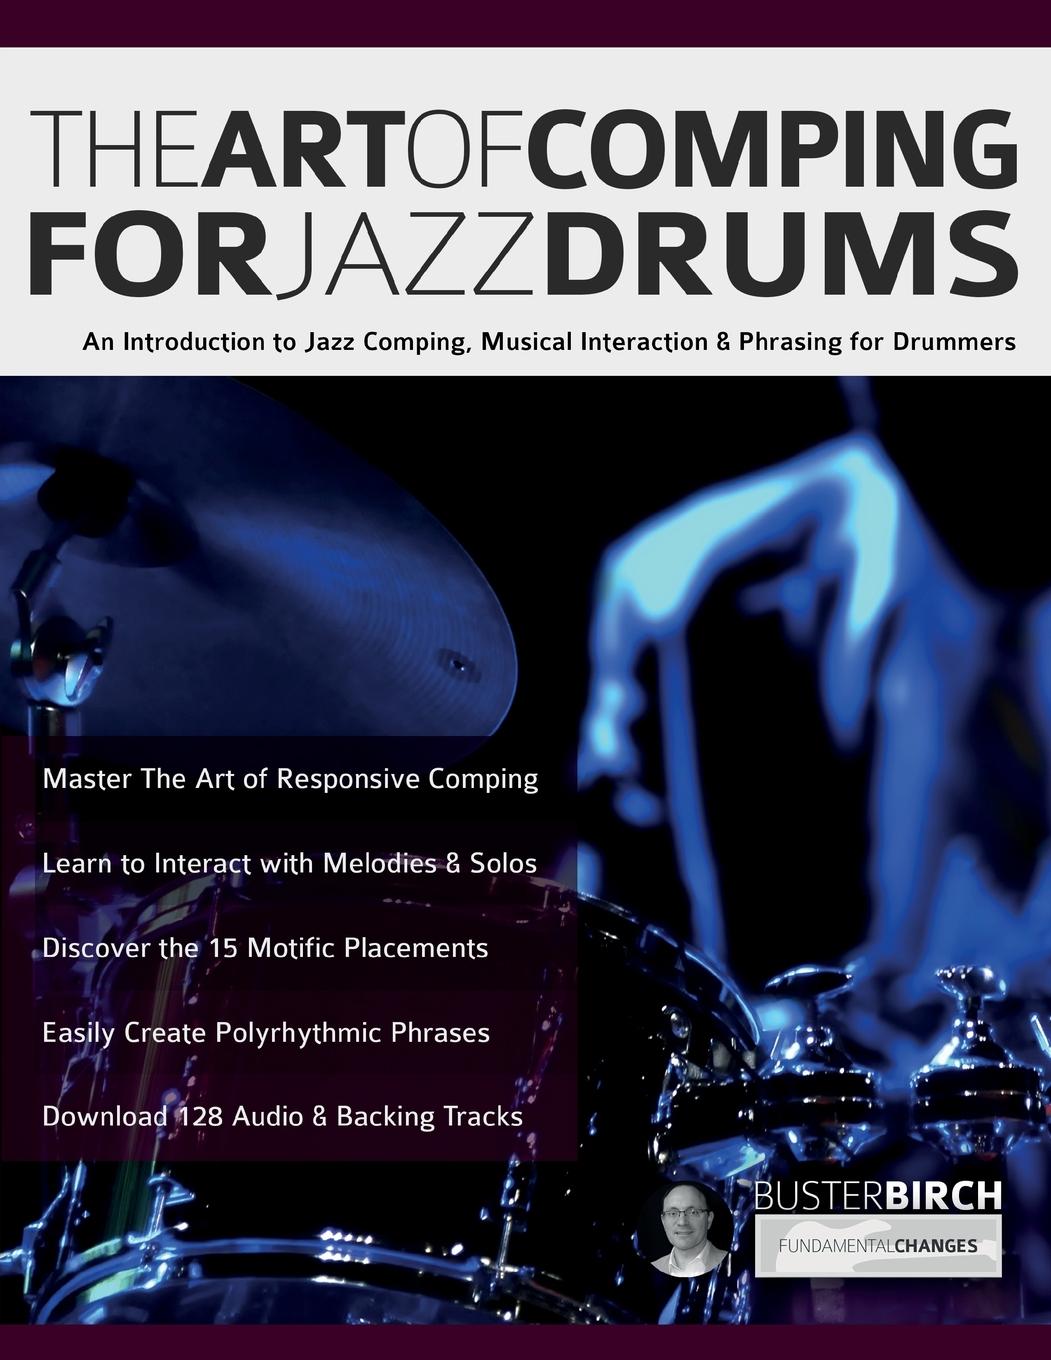 Book The Art of Comping for Jazz Drums Joseph Alexander